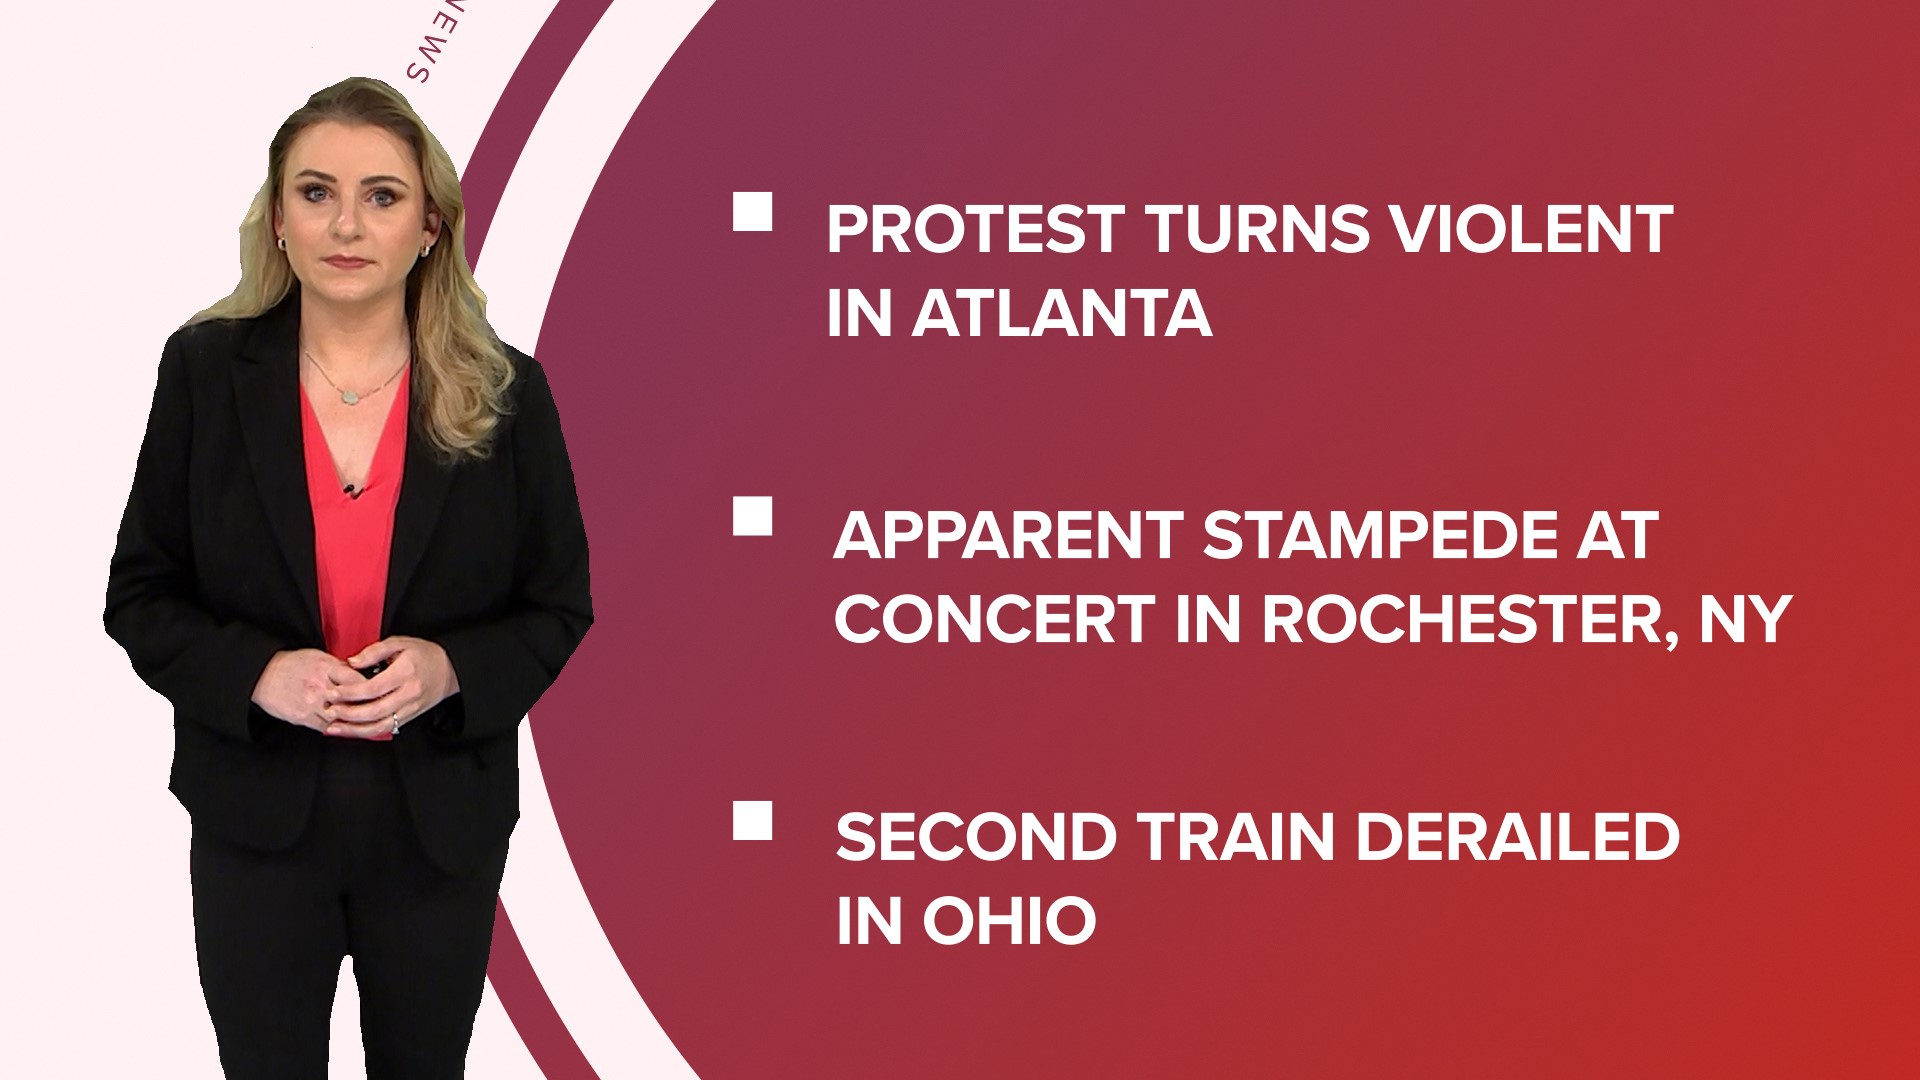 A look at what is happening in the news from protests in Atlanta over a police training facility to a 2nd train derailment in Ohio and KETO diet concerns.